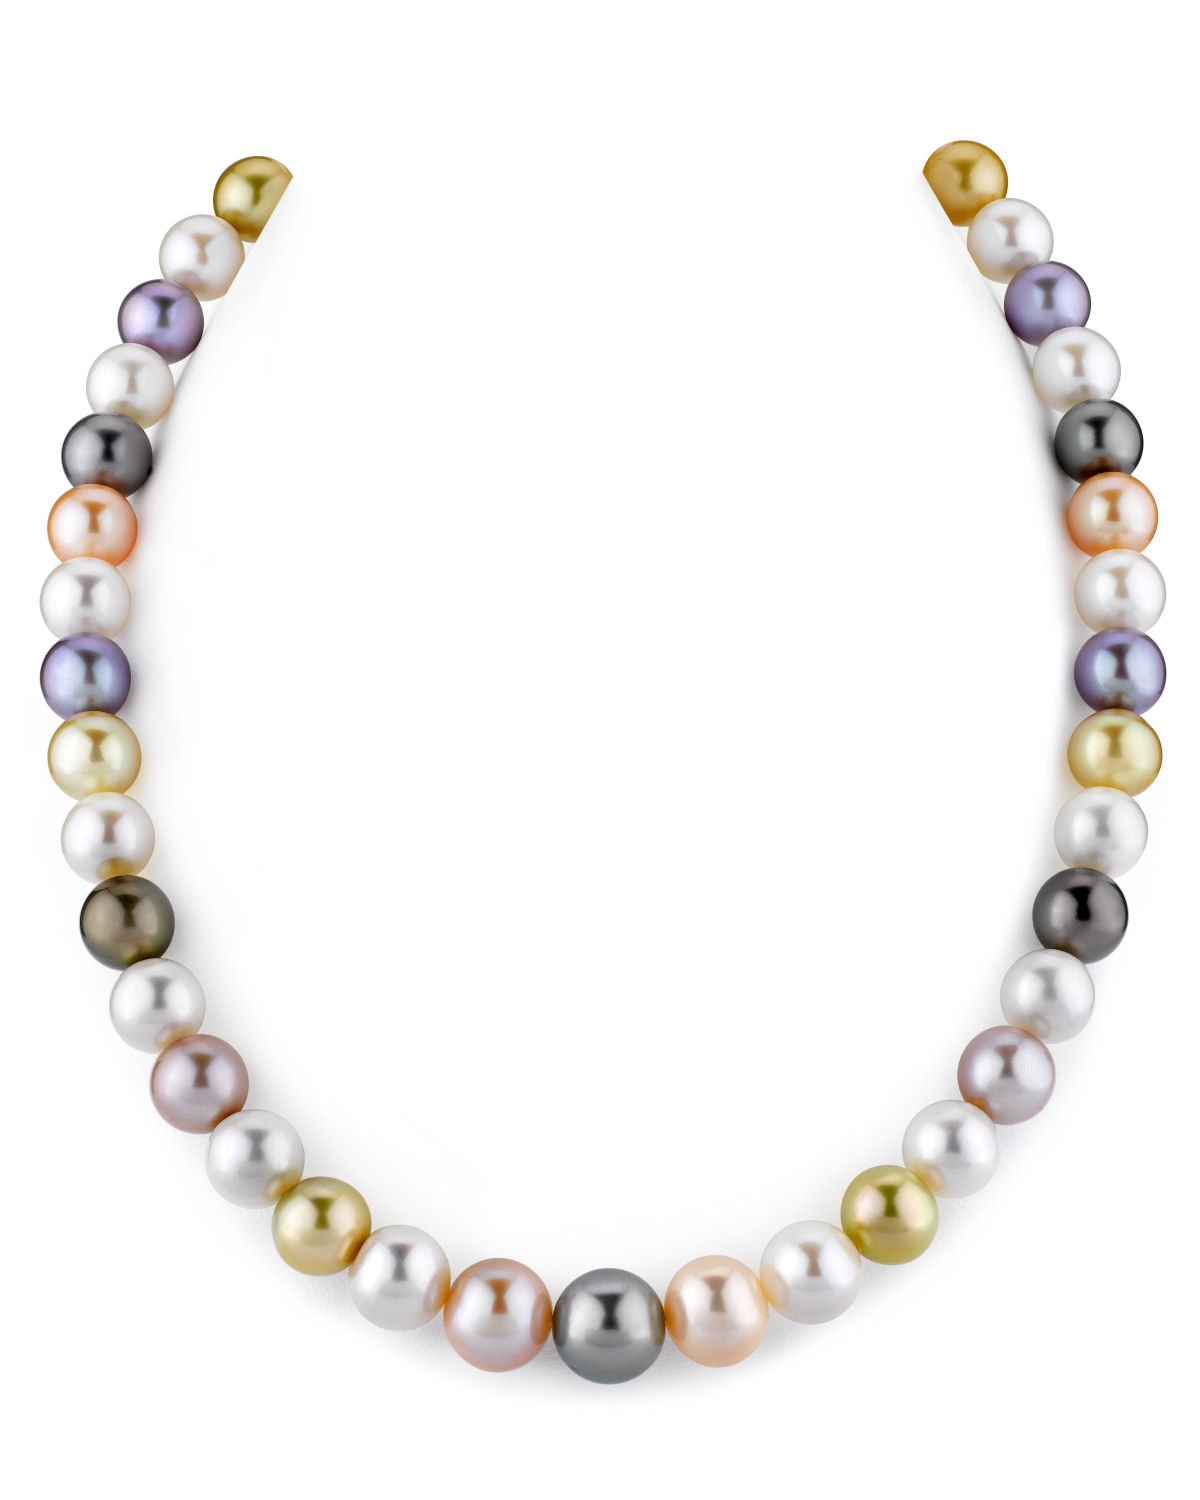 9-11mm Tahitian & Freshwater Multicolor Pearl Necklace - AAA Quality